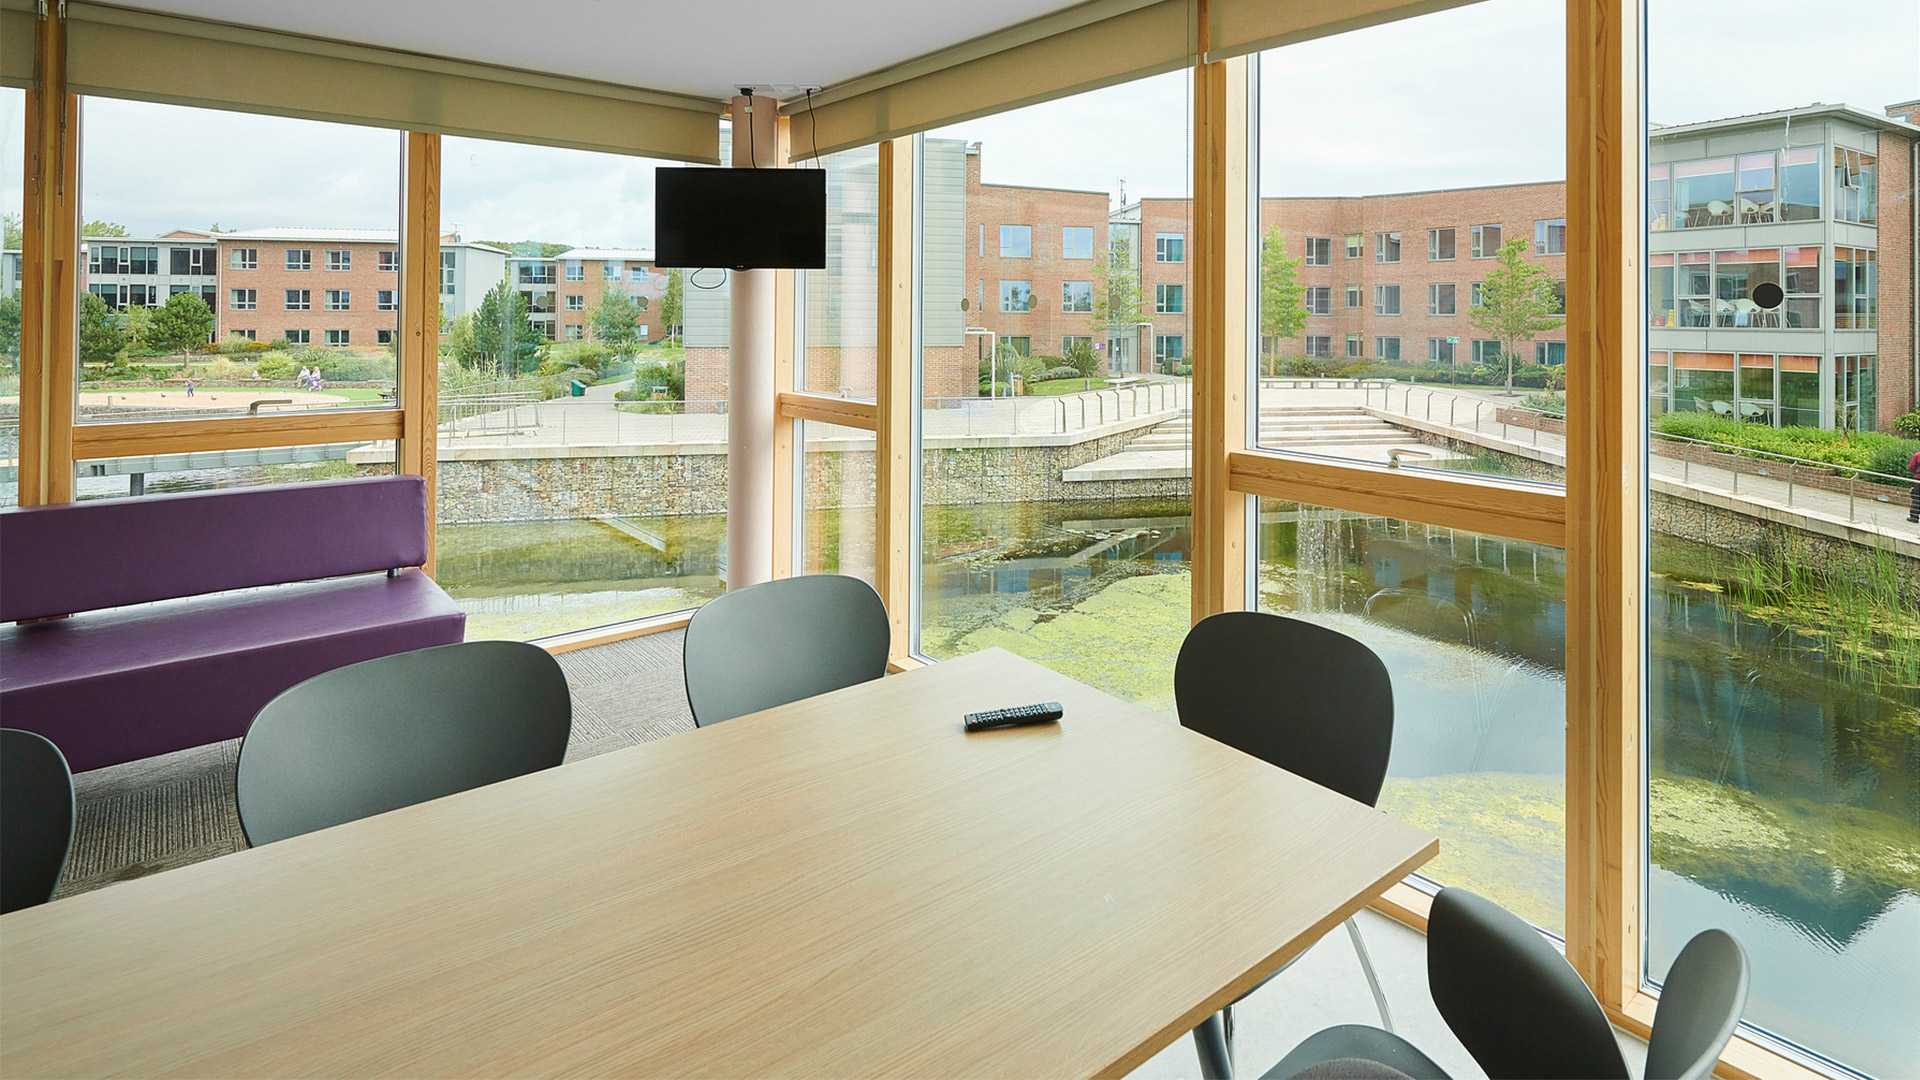 An Edge hill University halls living room with large window looking out onto campus